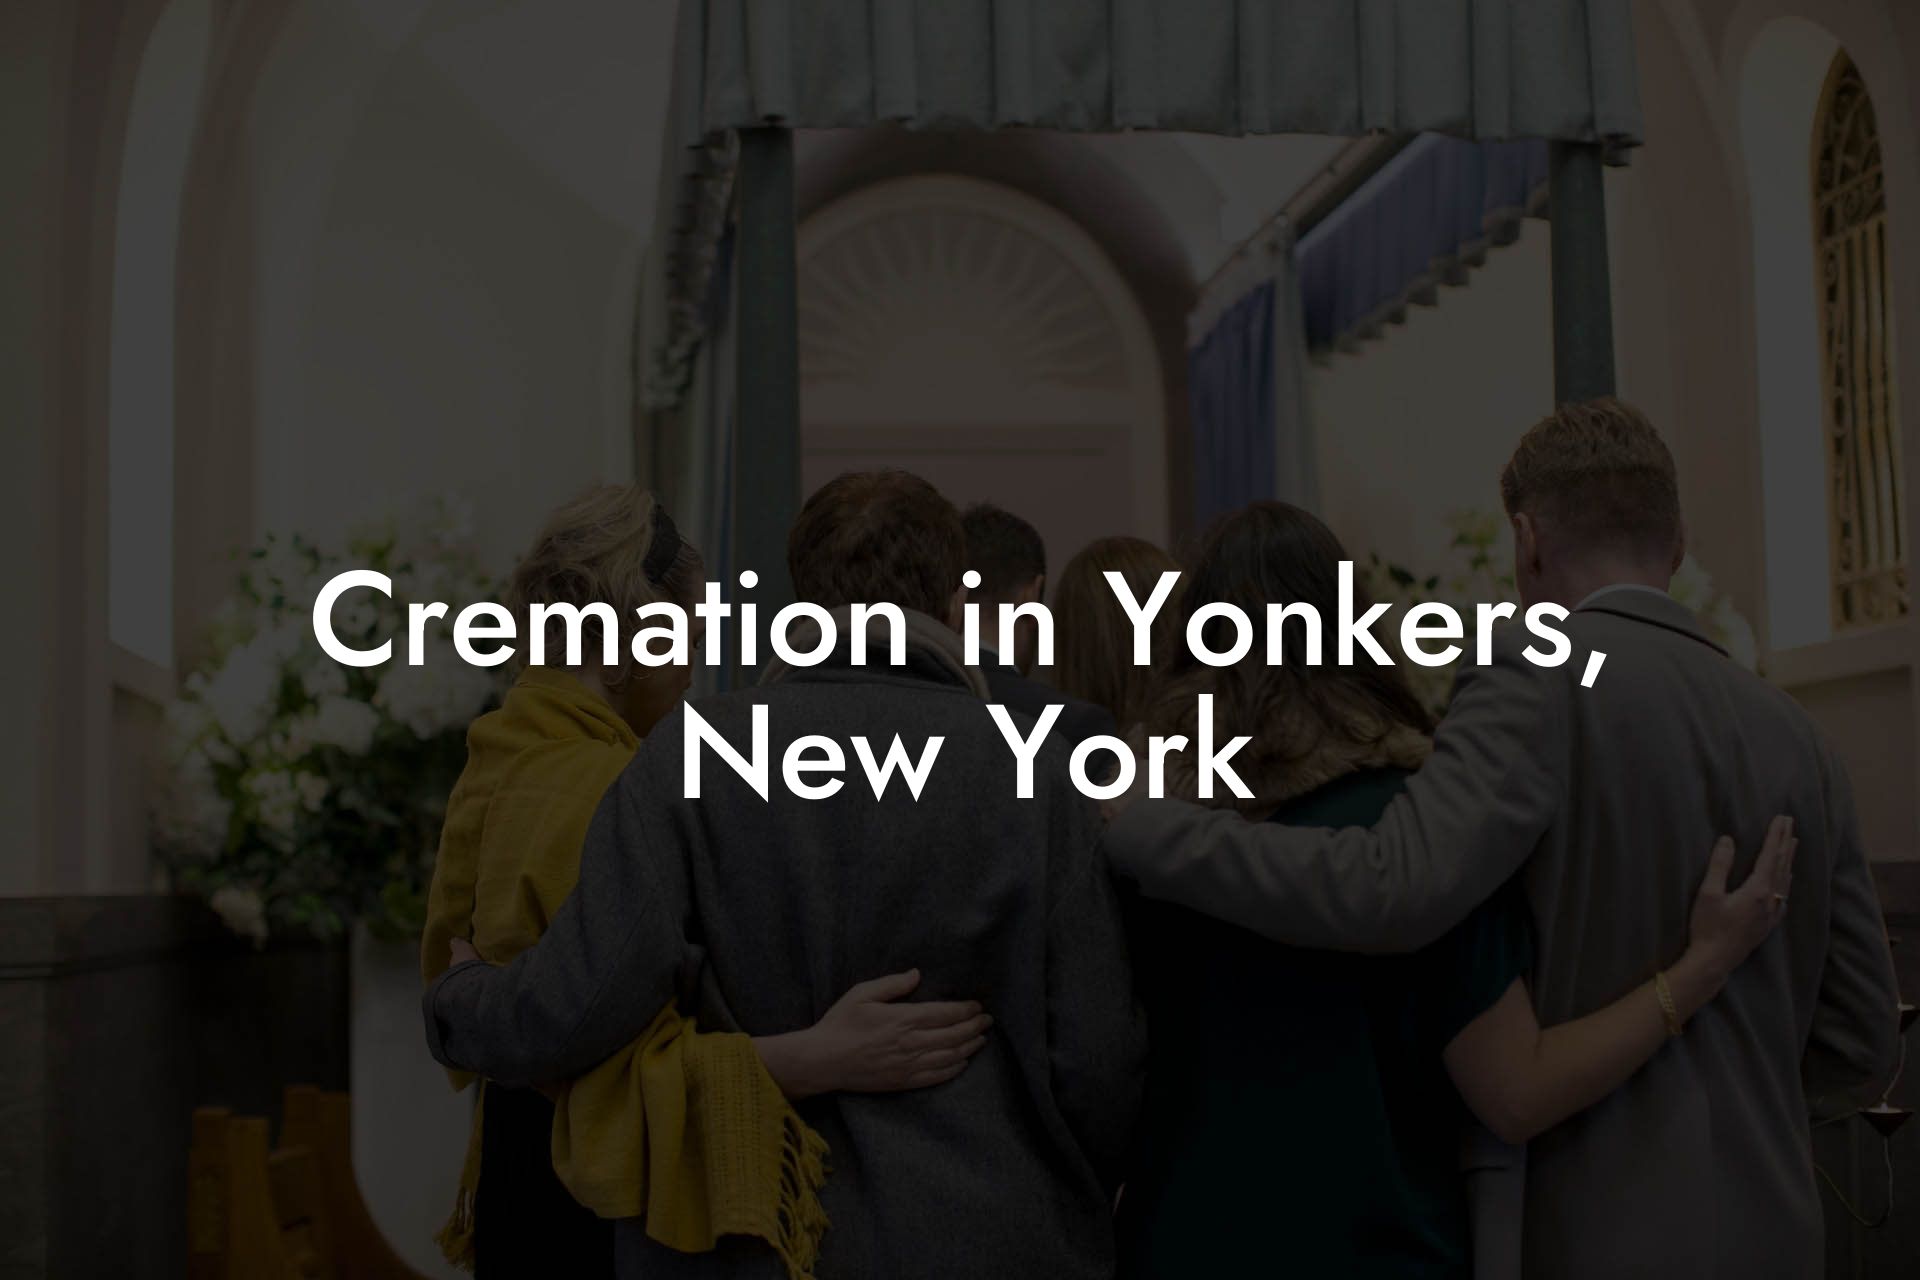 Cremation in Yonkers, New York